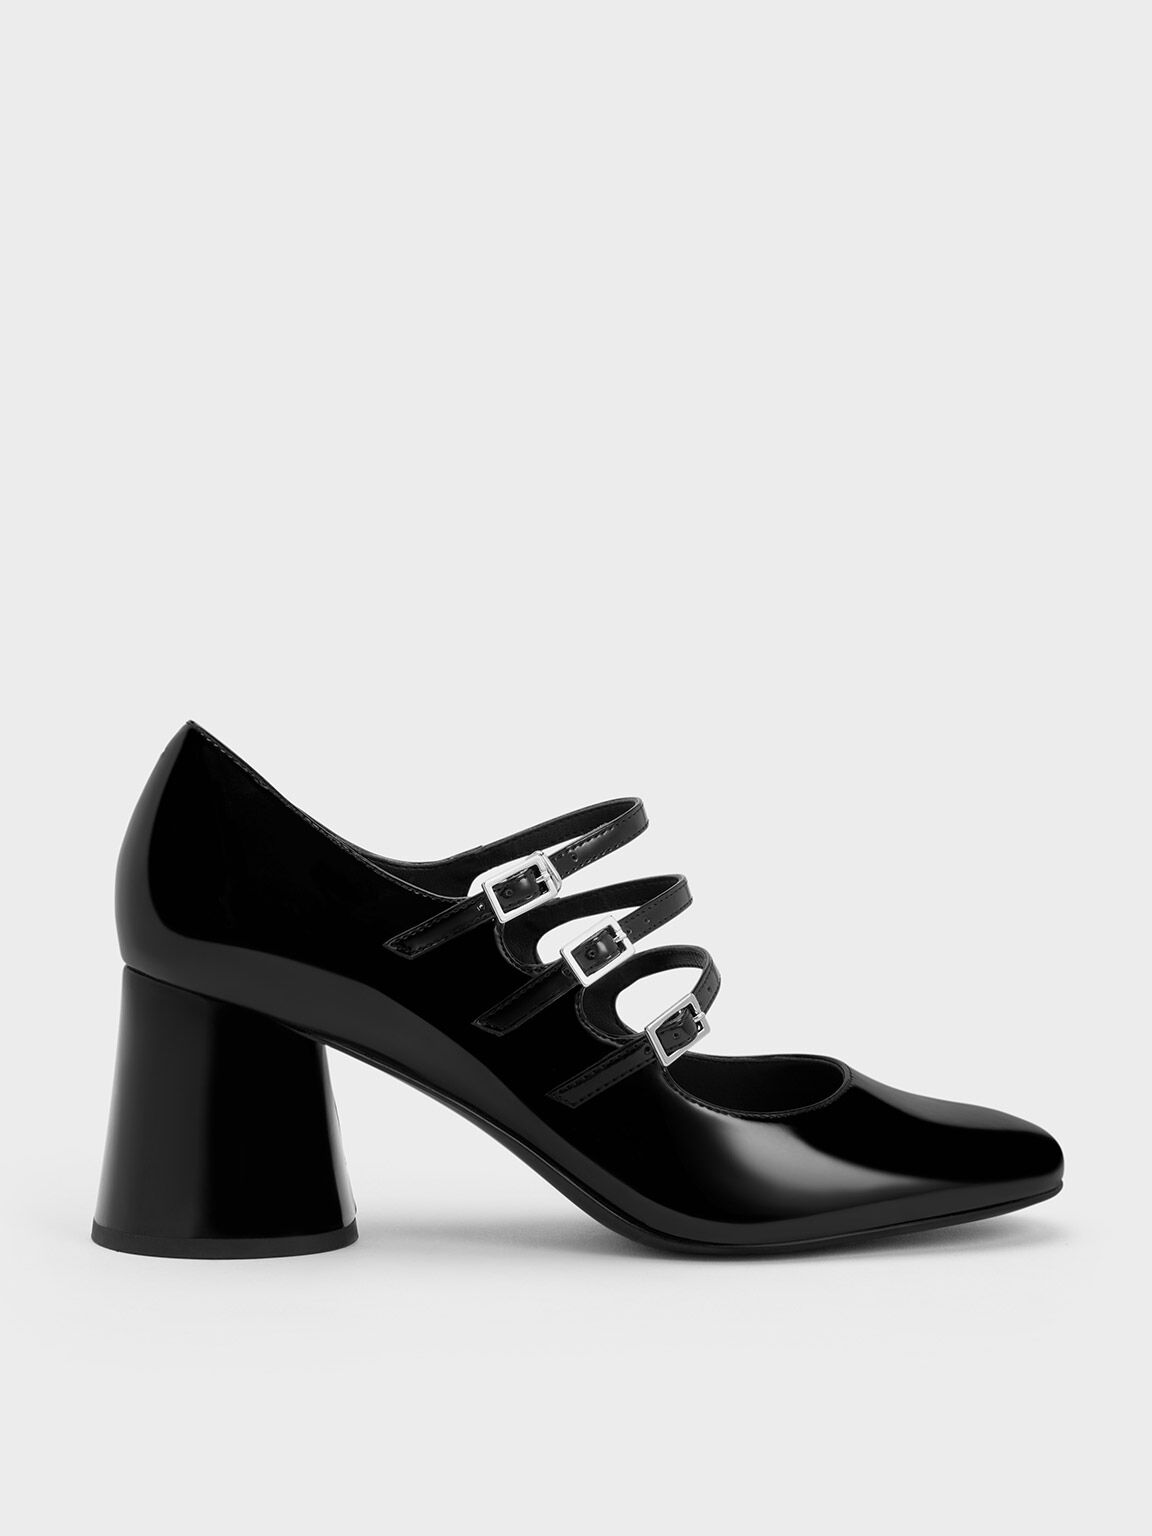 Buckled Cylindrical Heel Mary Janes, Black, hi-res